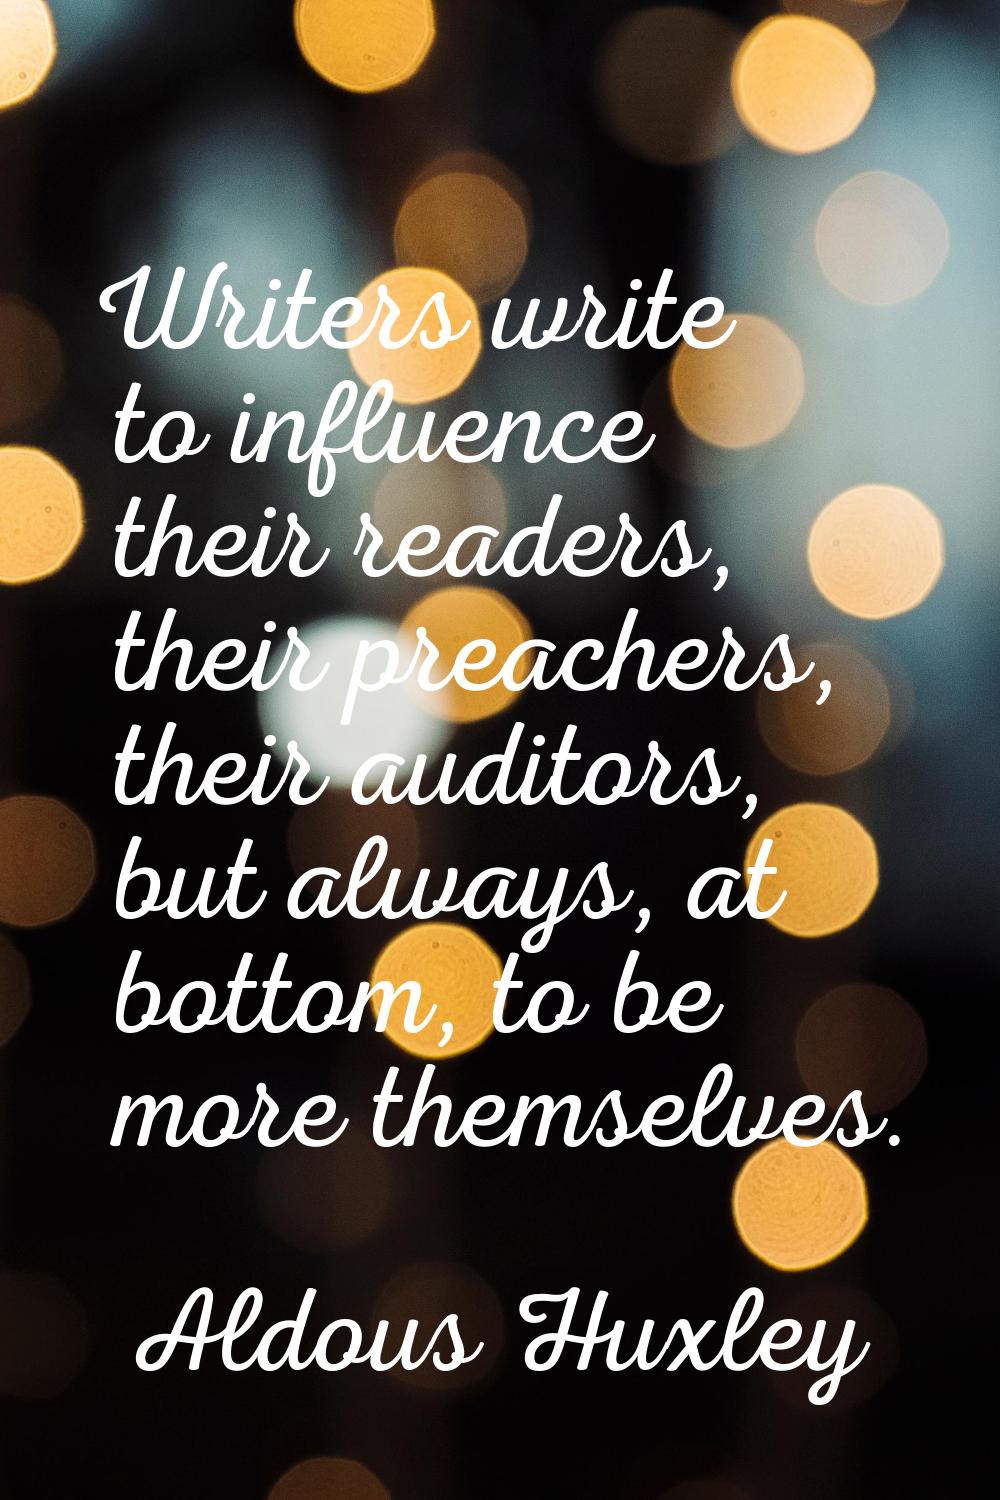 Writers write to influence their readers, their preachers, their auditors, but always, at bottom, t